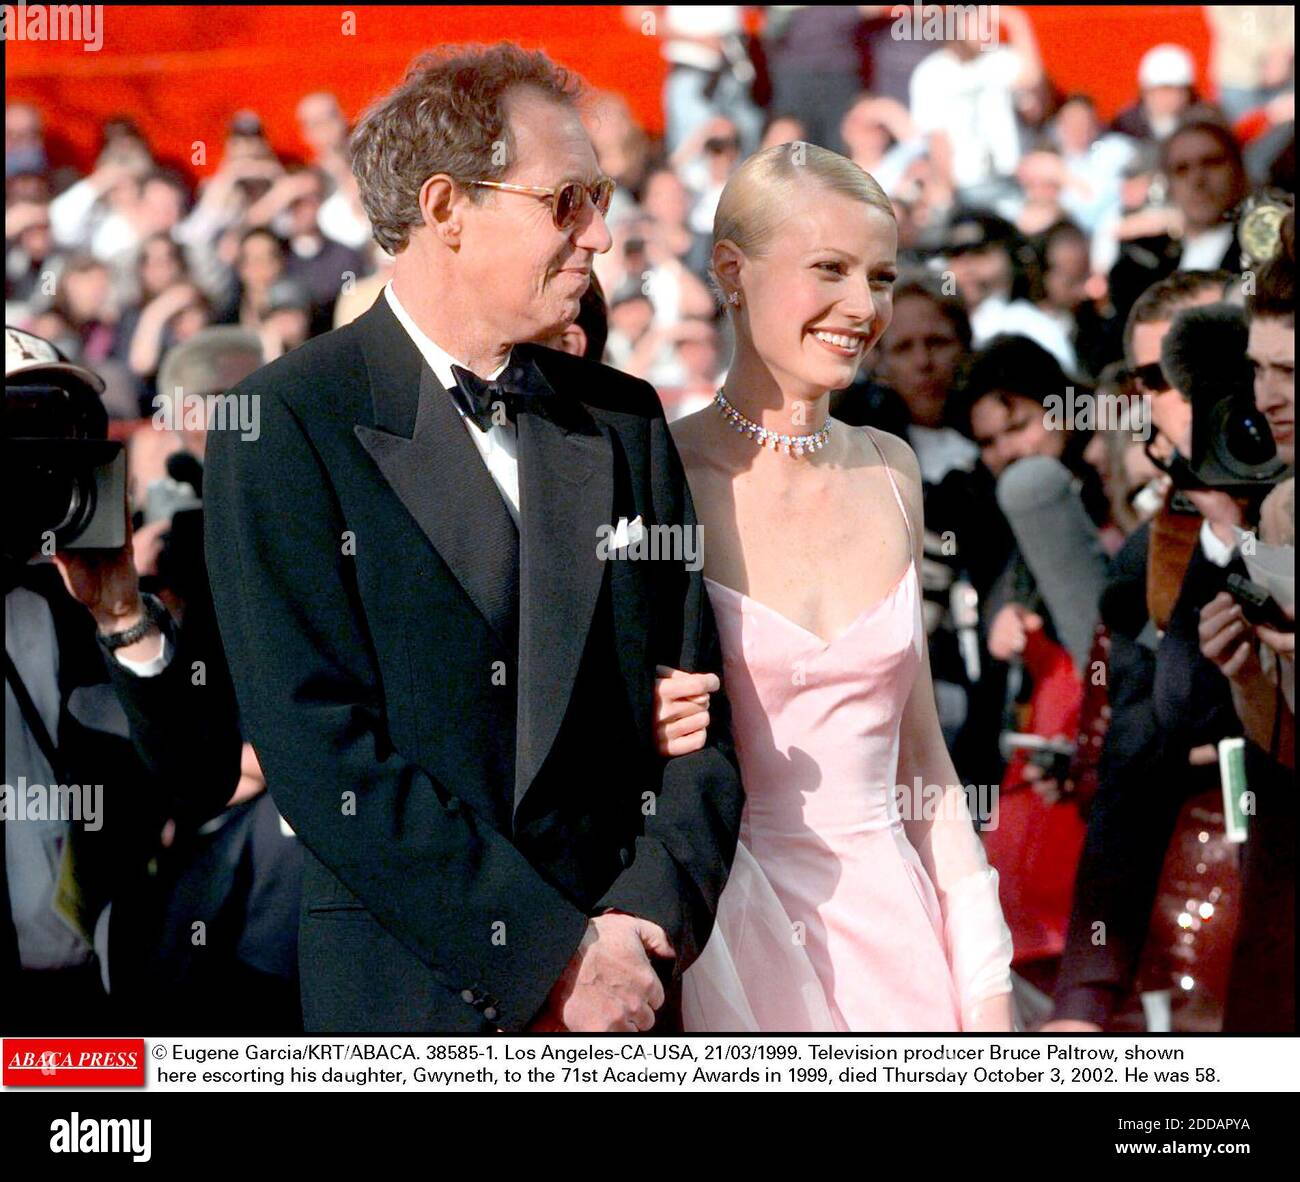 NO FILM, NO VIDEO, NO TV, NO DOCUMENTARY - © Eugene Garcia/KRT/ABACA. 38585-1. Los Angeles-CA-USA, 21/03/1999. Television producer Bruce Paltrow, shown here escorting his daughter, Gwyneth, to the 71st Academy Awards in 1999, died Thursday October 3, 2002. He was 58. Stock Photo